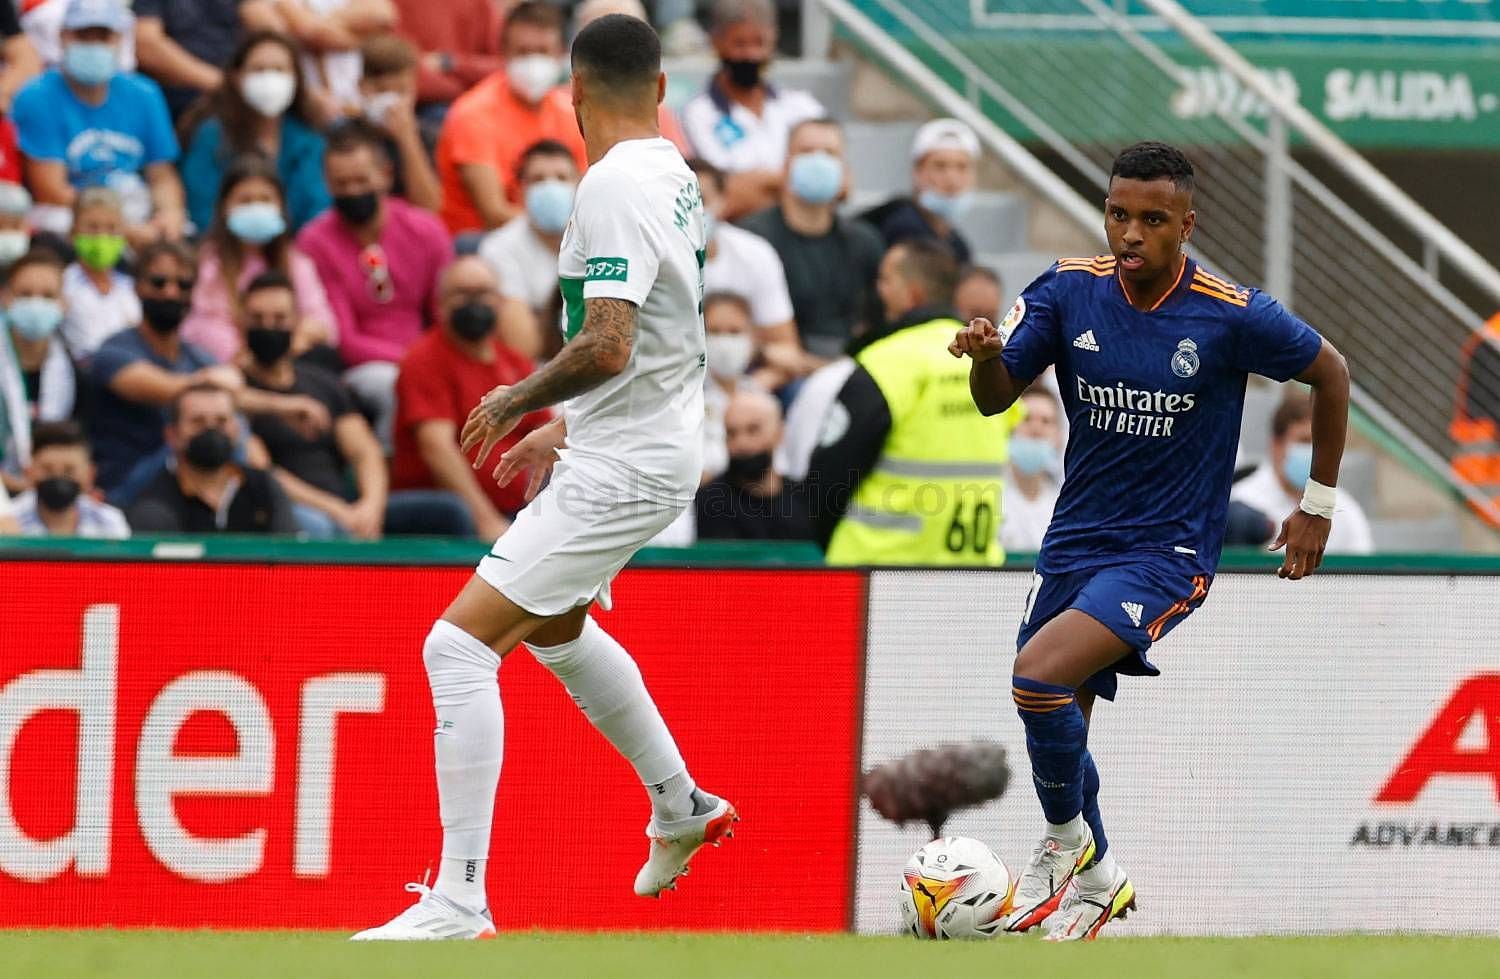 Rodrygo lasted only 18 minutes in the game before trudging off with a muscle injury.